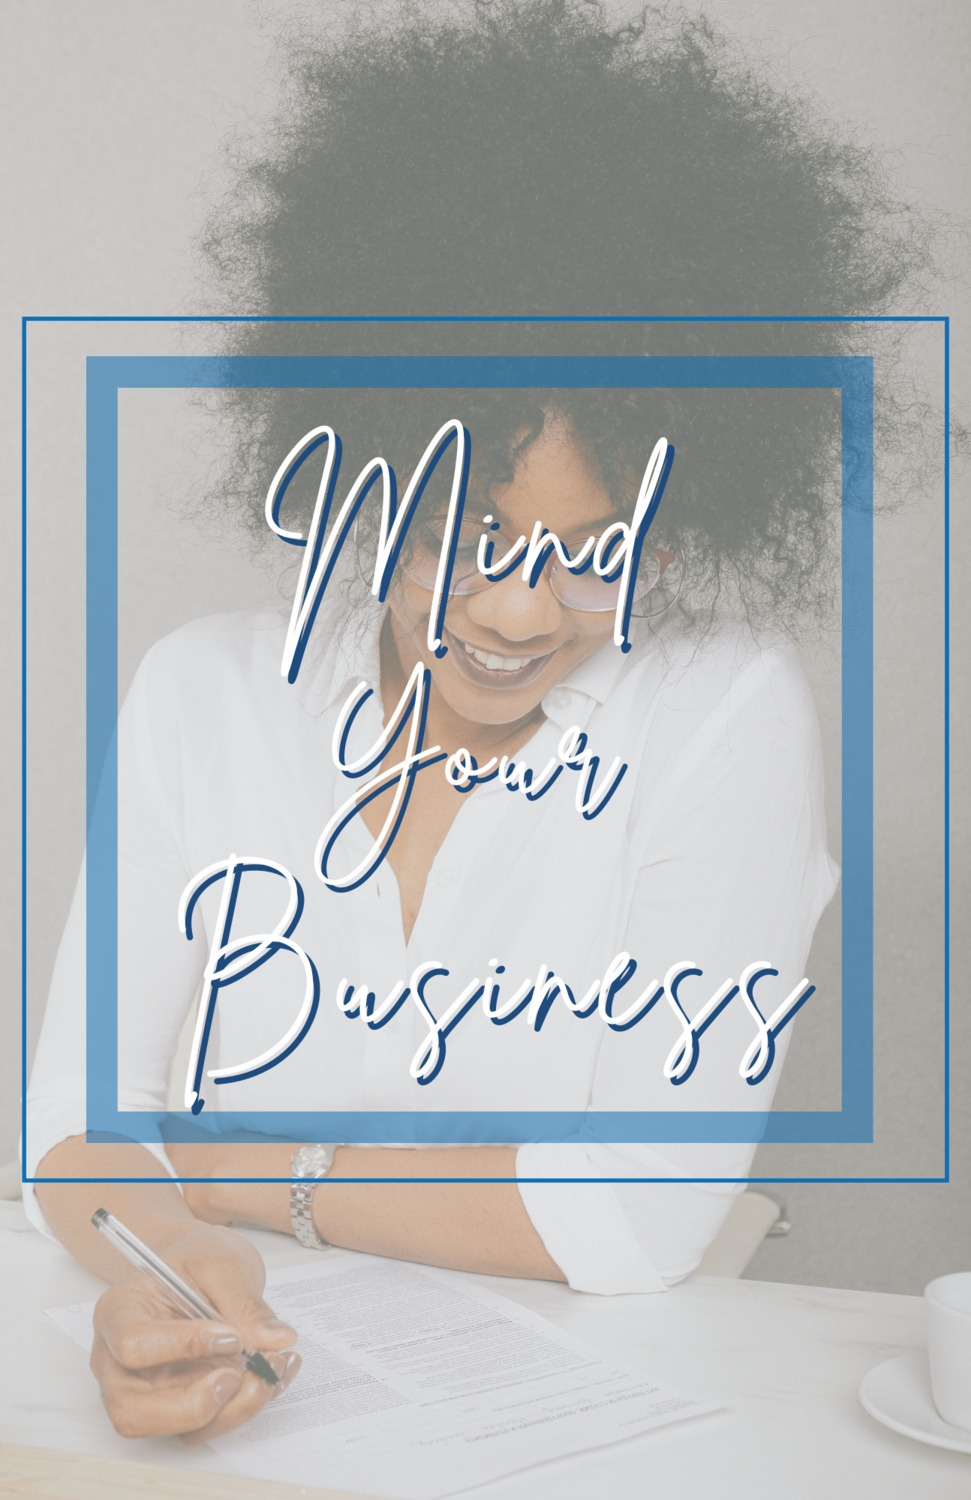 Mind Your Business Credit - Business Owners